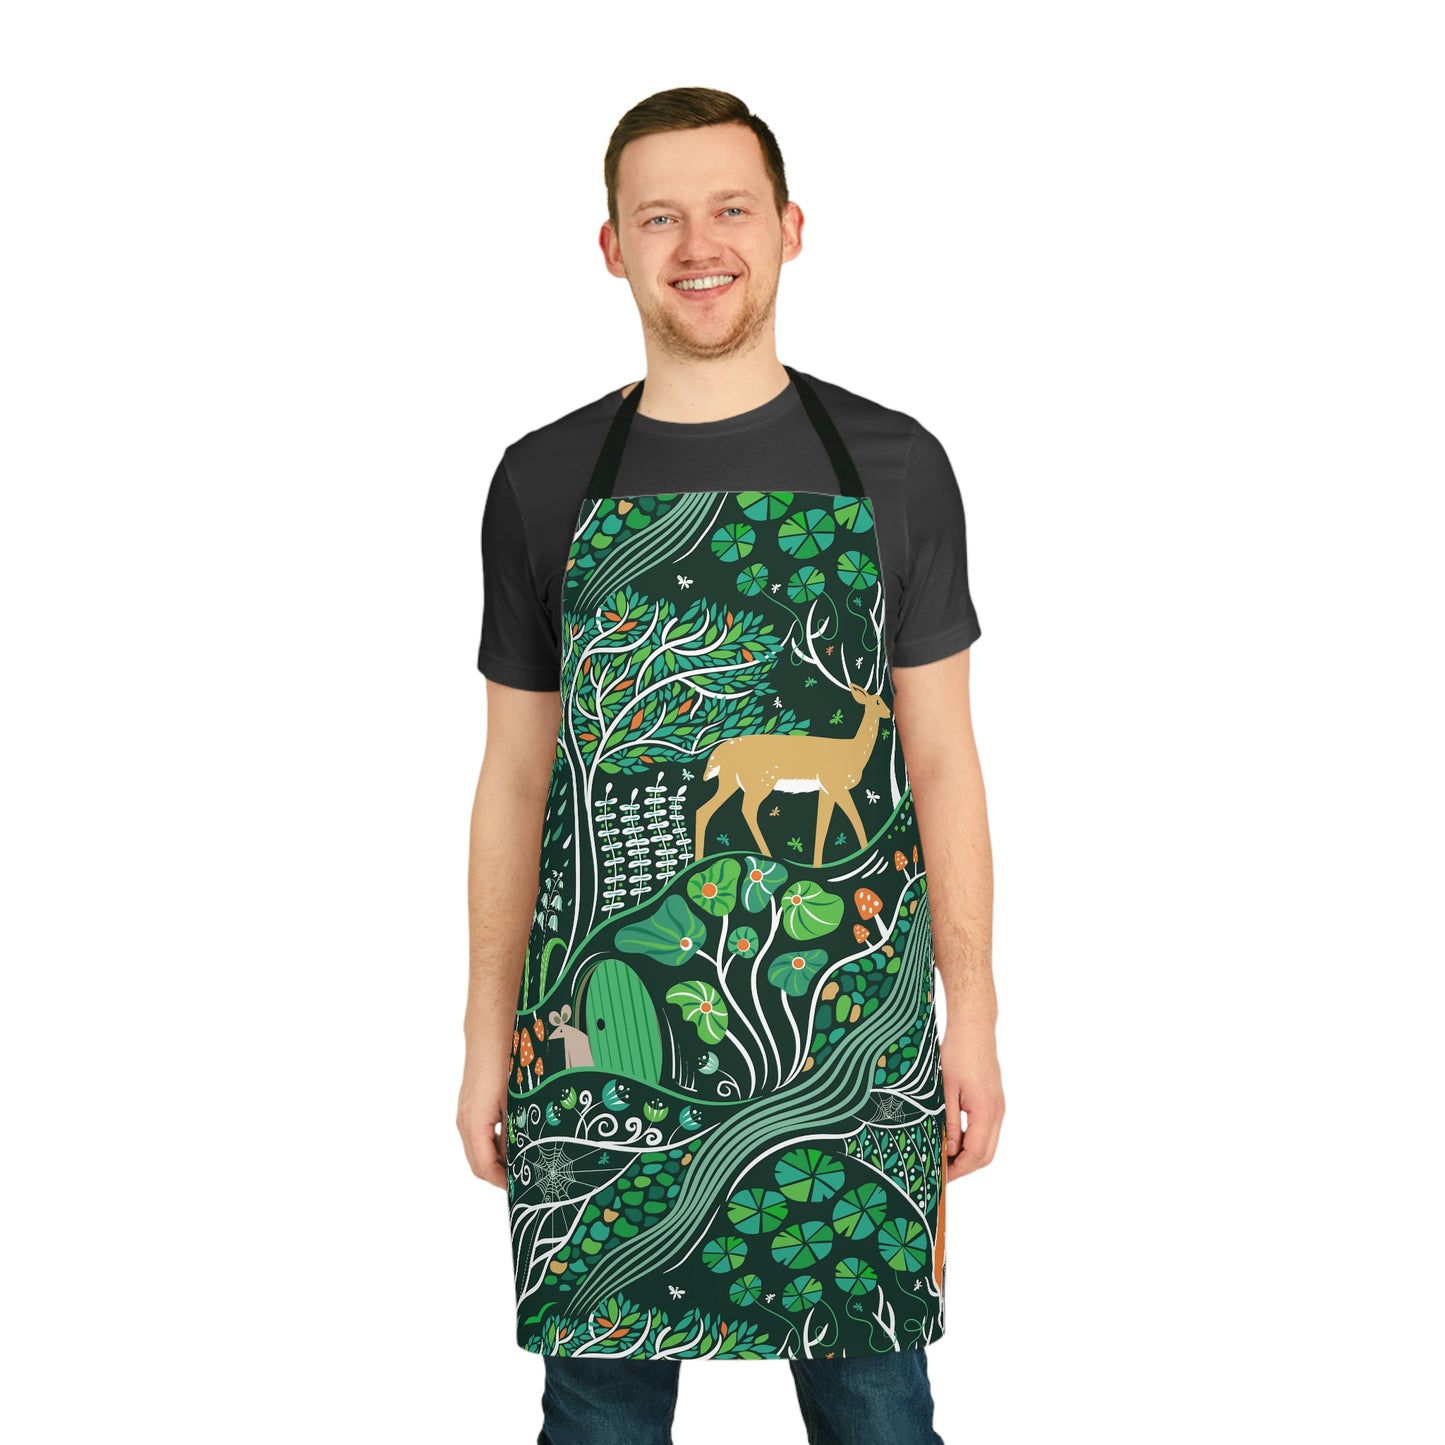 Emerald Forest Apron